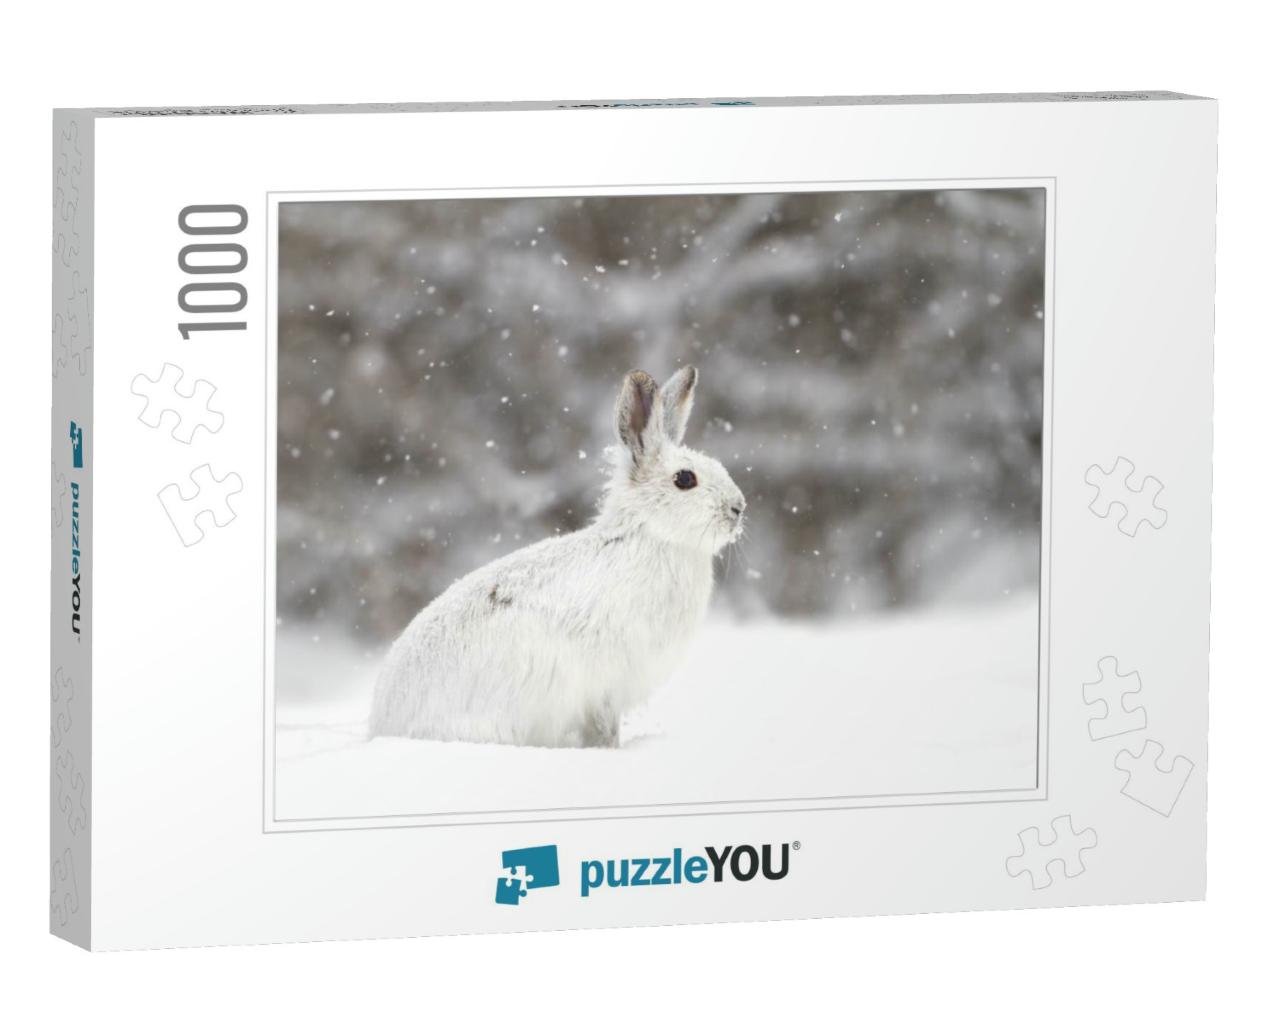 White Snowshoe Hare or Varying Hare in the Falling Snow i... Jigsaw Puzzle with 1000 pieces